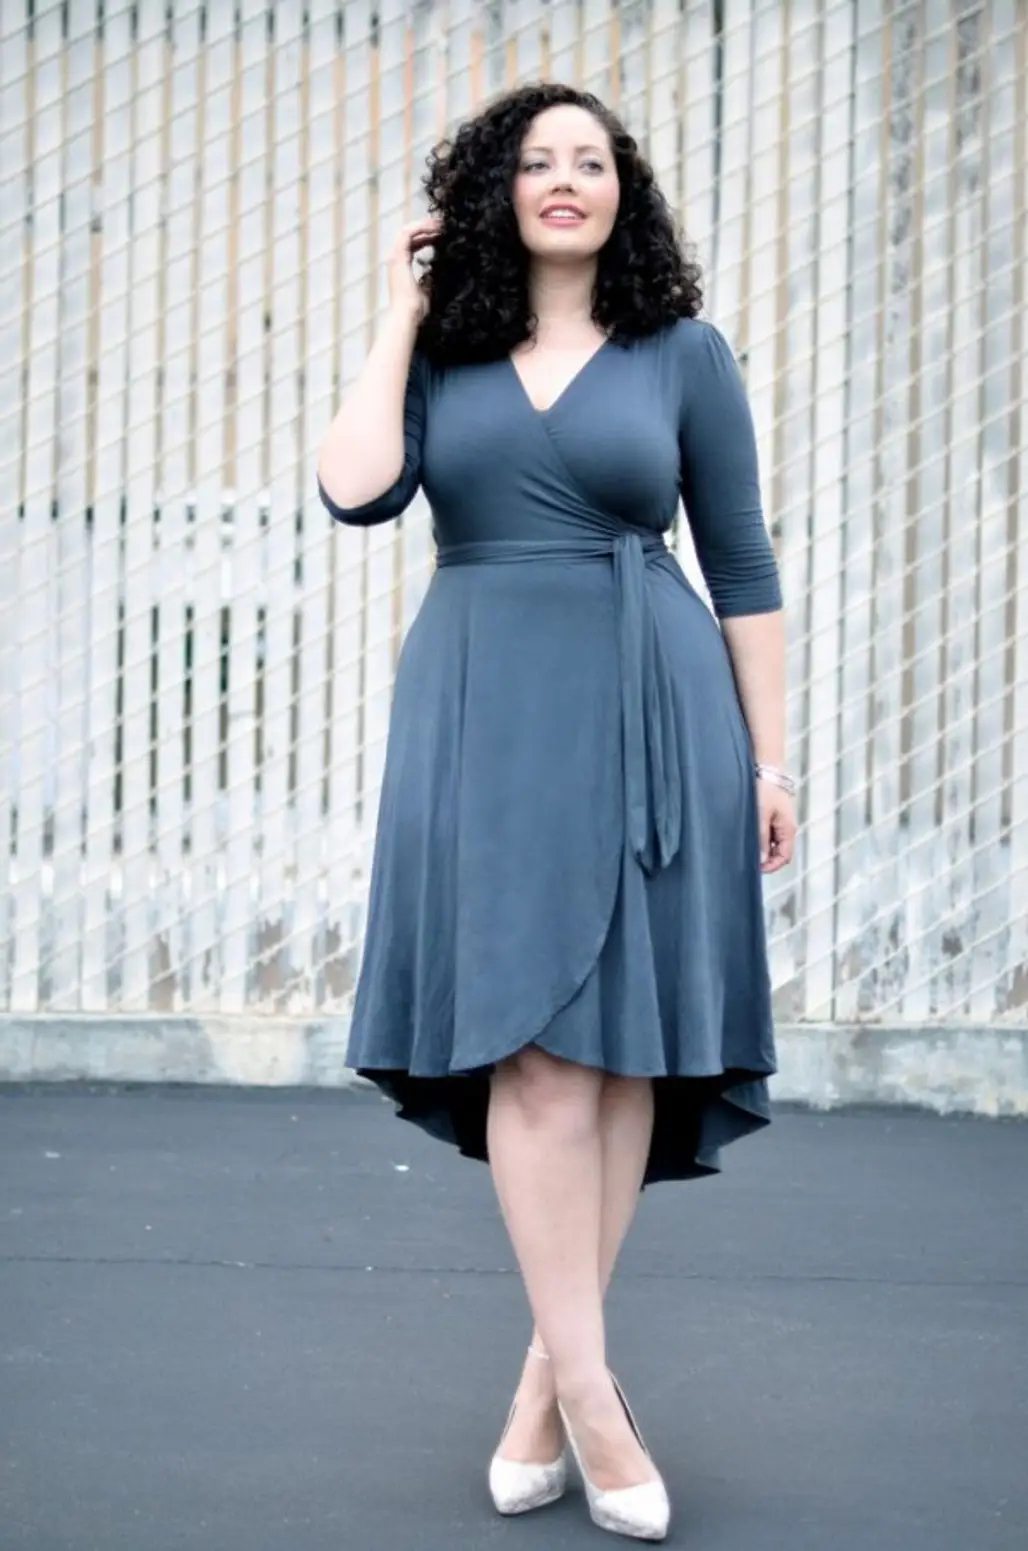 A Curvy Girl Classic and Must Have - the Wrap Dress